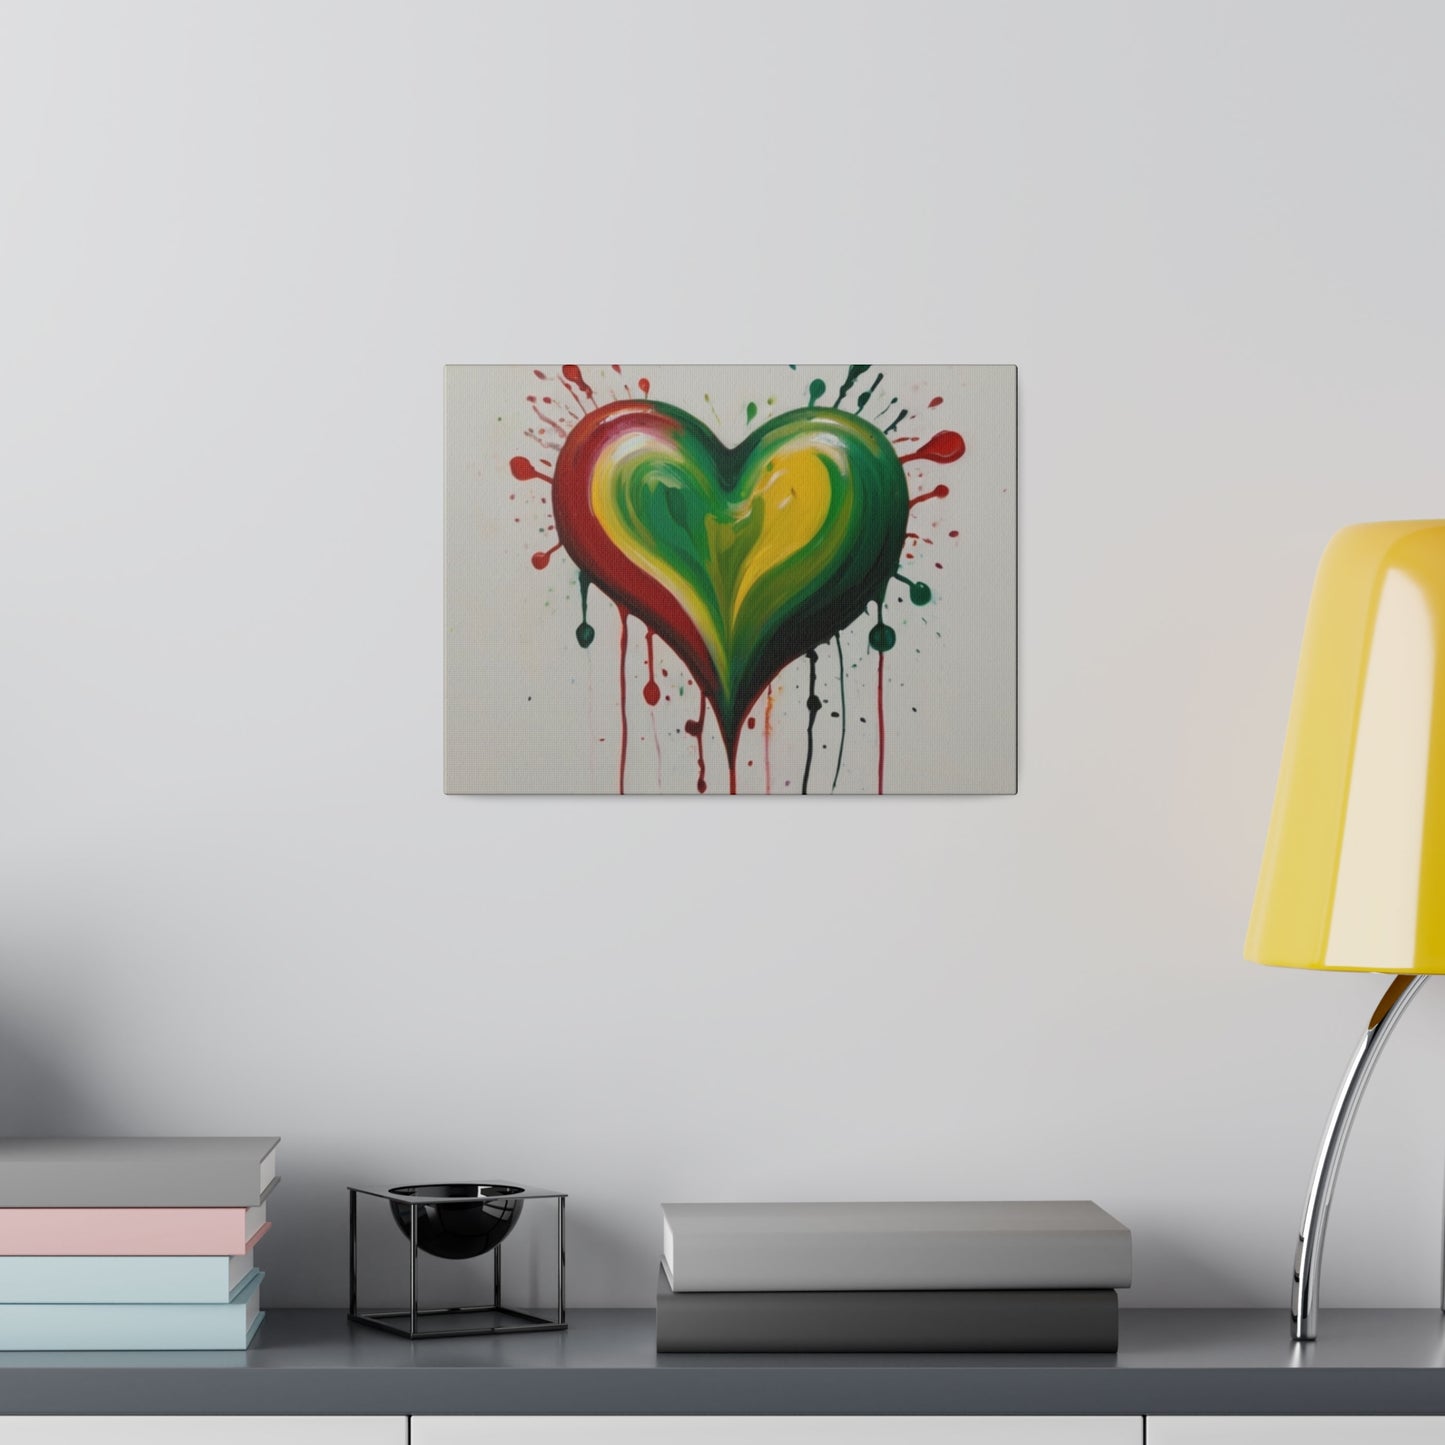 Dripping Green Love Heart - Matte Canvas, Stretched, 0.75"